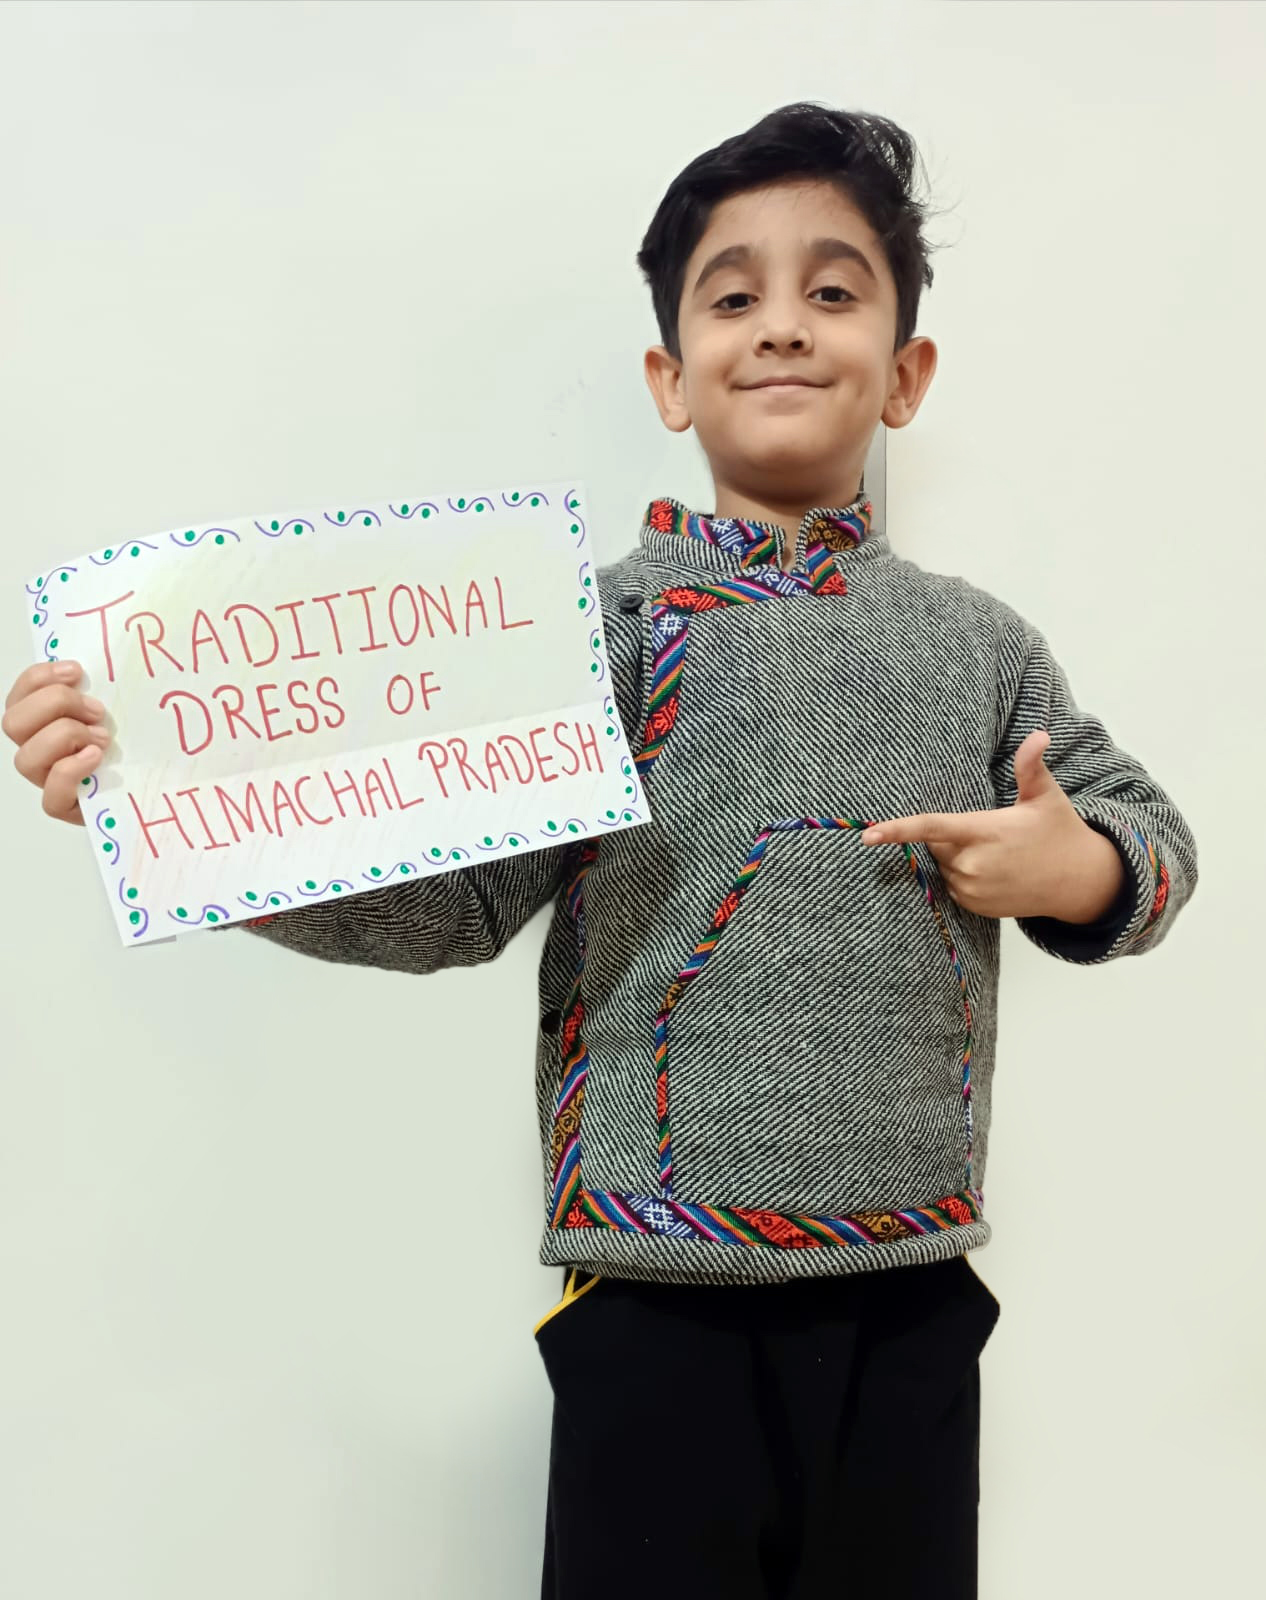 Presidium Dwarka-6, STUDENTS LEARN ABOUT THE DIFFERENT PATTERNS IN CLOTHES